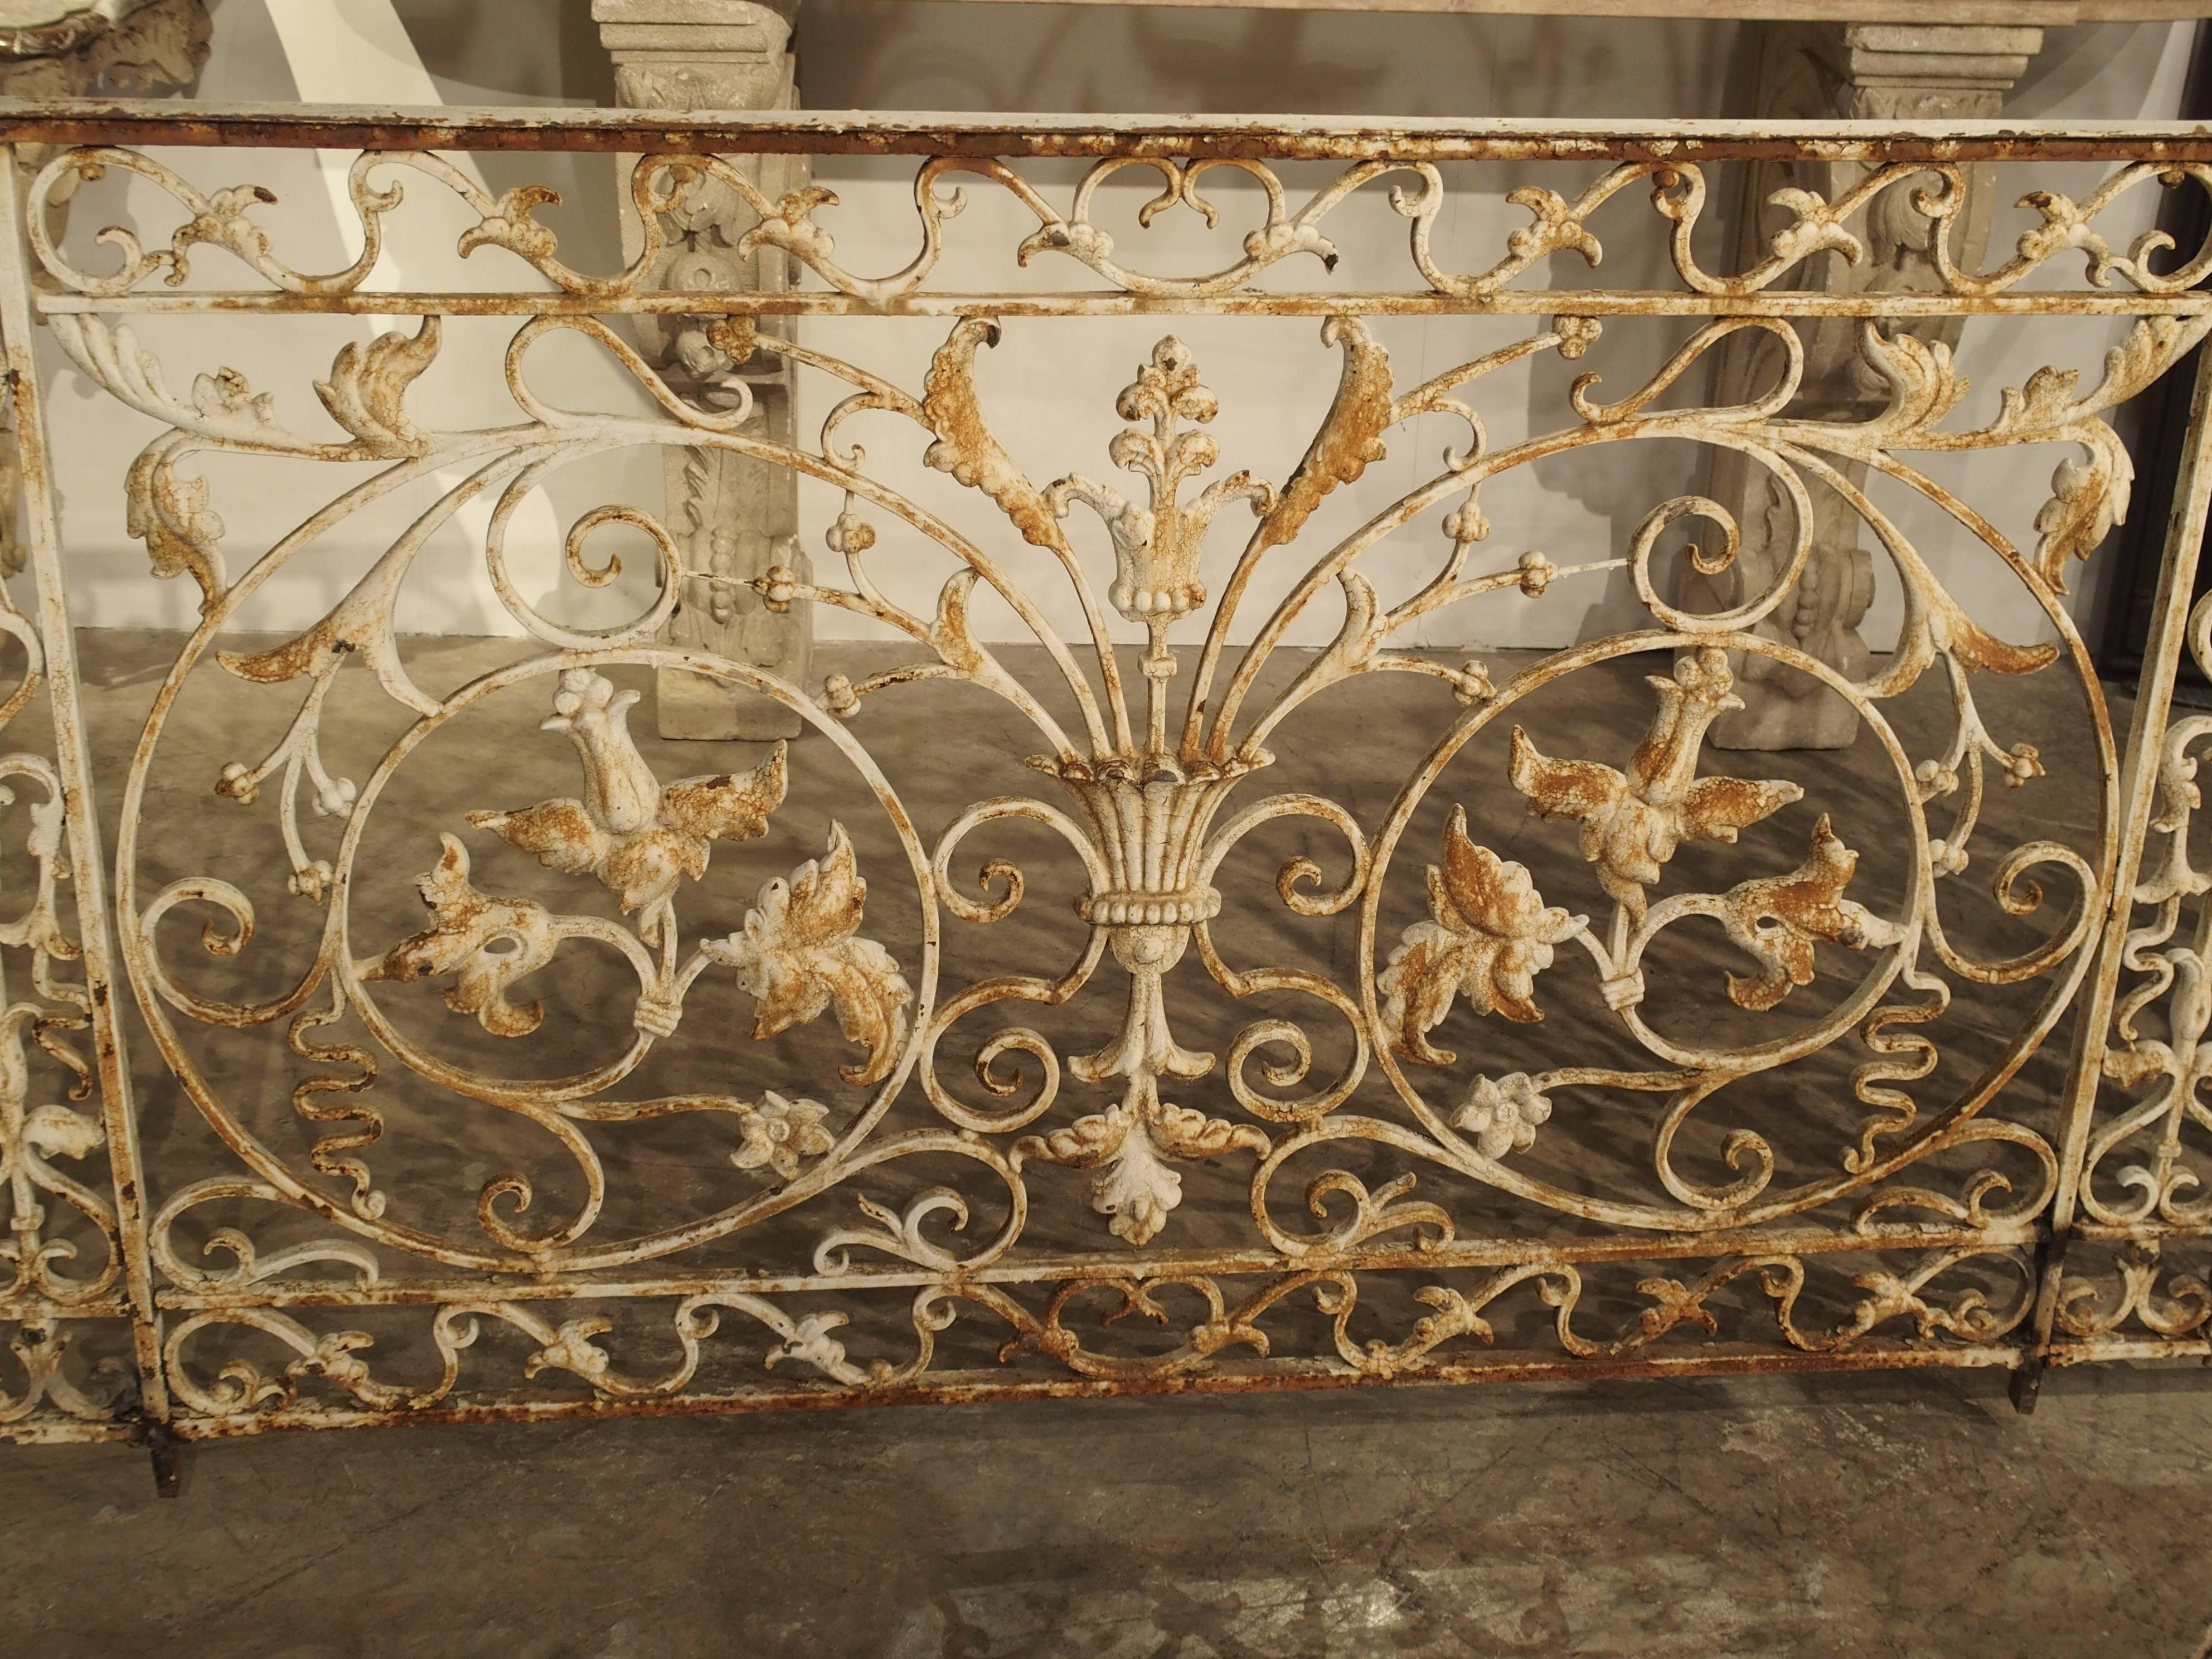 Napoleon III Circa 1860 Painted Cast Iron Balcony Railing from Montpellier, France